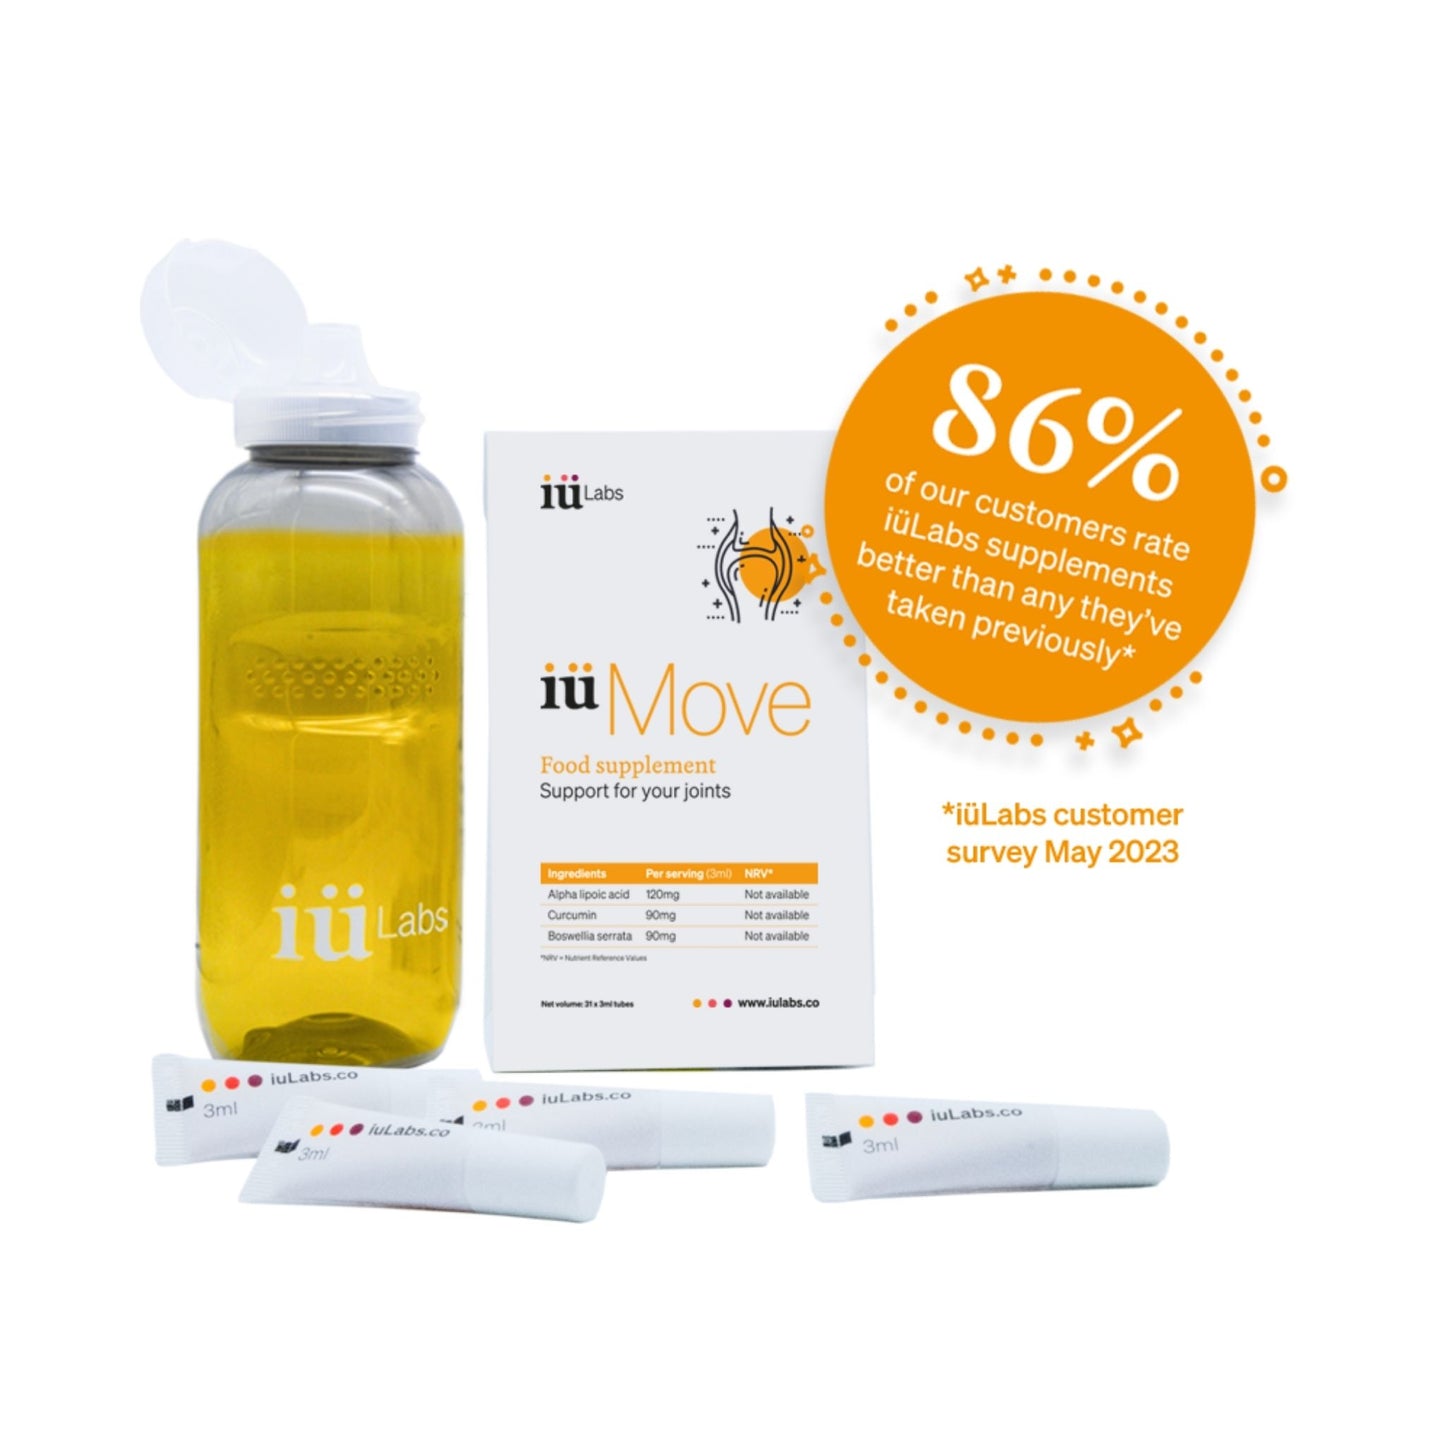 One month pack of iüMove from iüLabs, joint health support supplement, tubes and package, with orange liquid water bottle, 86% of customers would recommend iüLabs